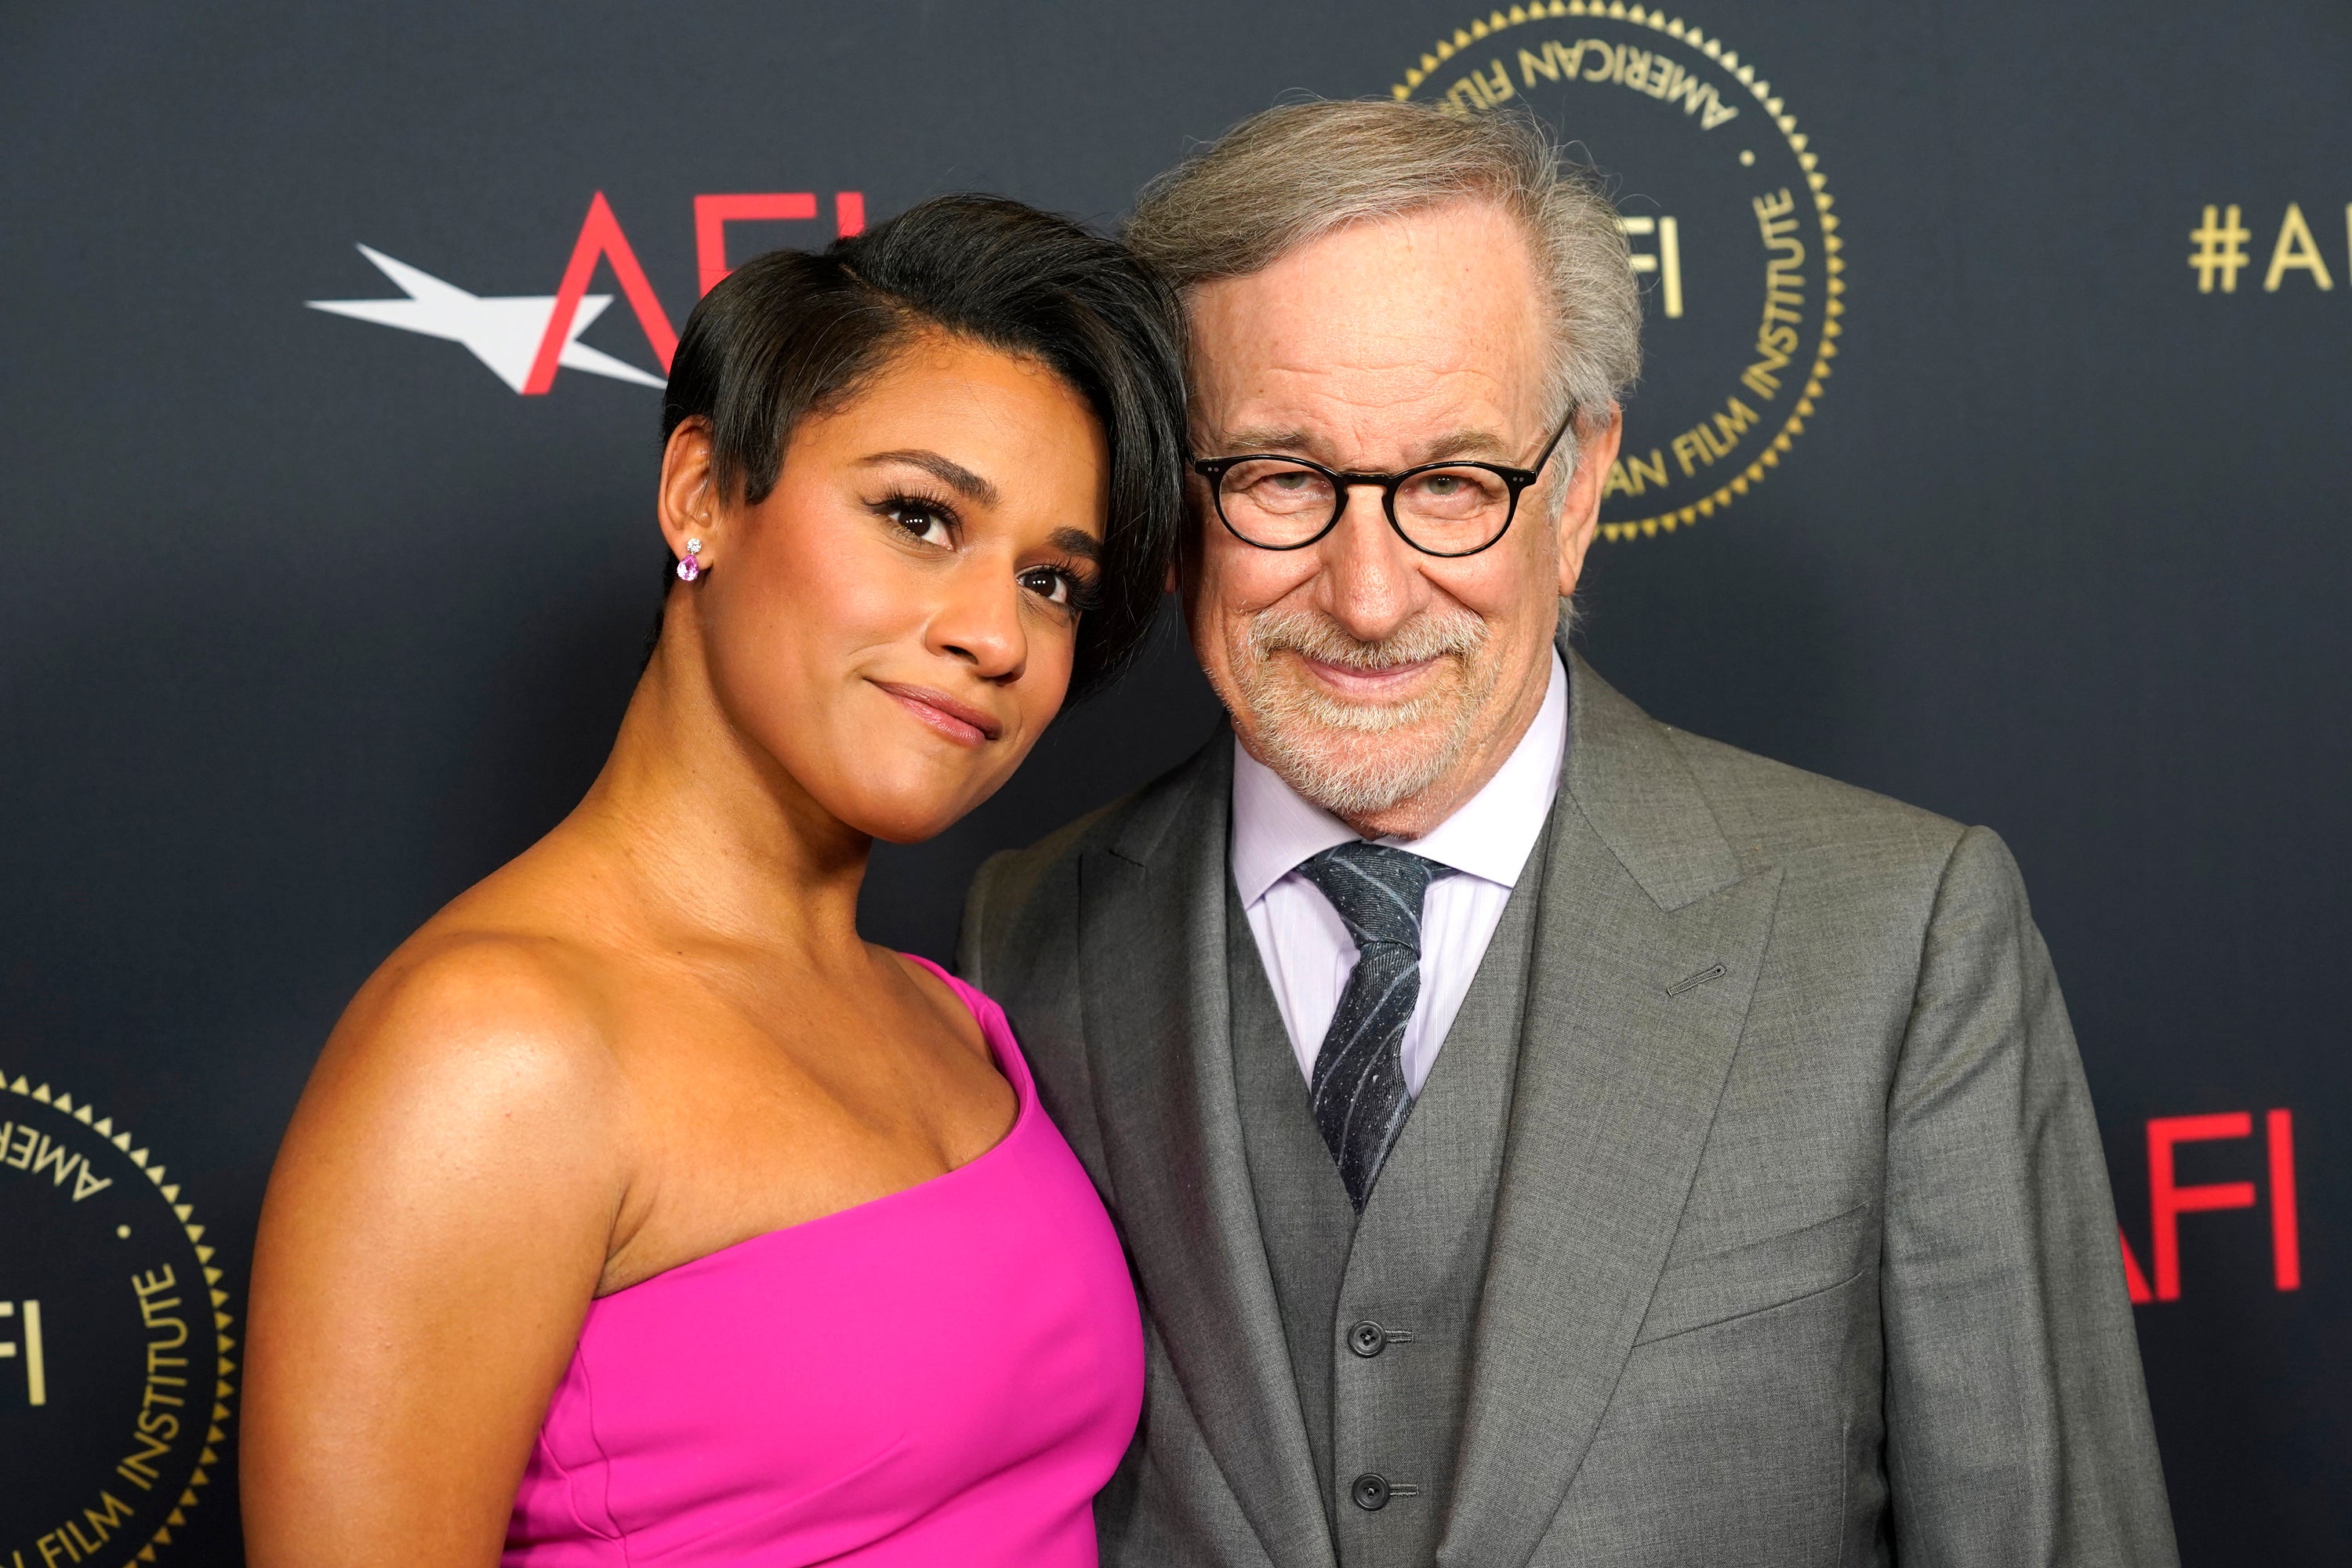 West Side Story actor Ariana DeBose with the film’s director Steven Spielberg